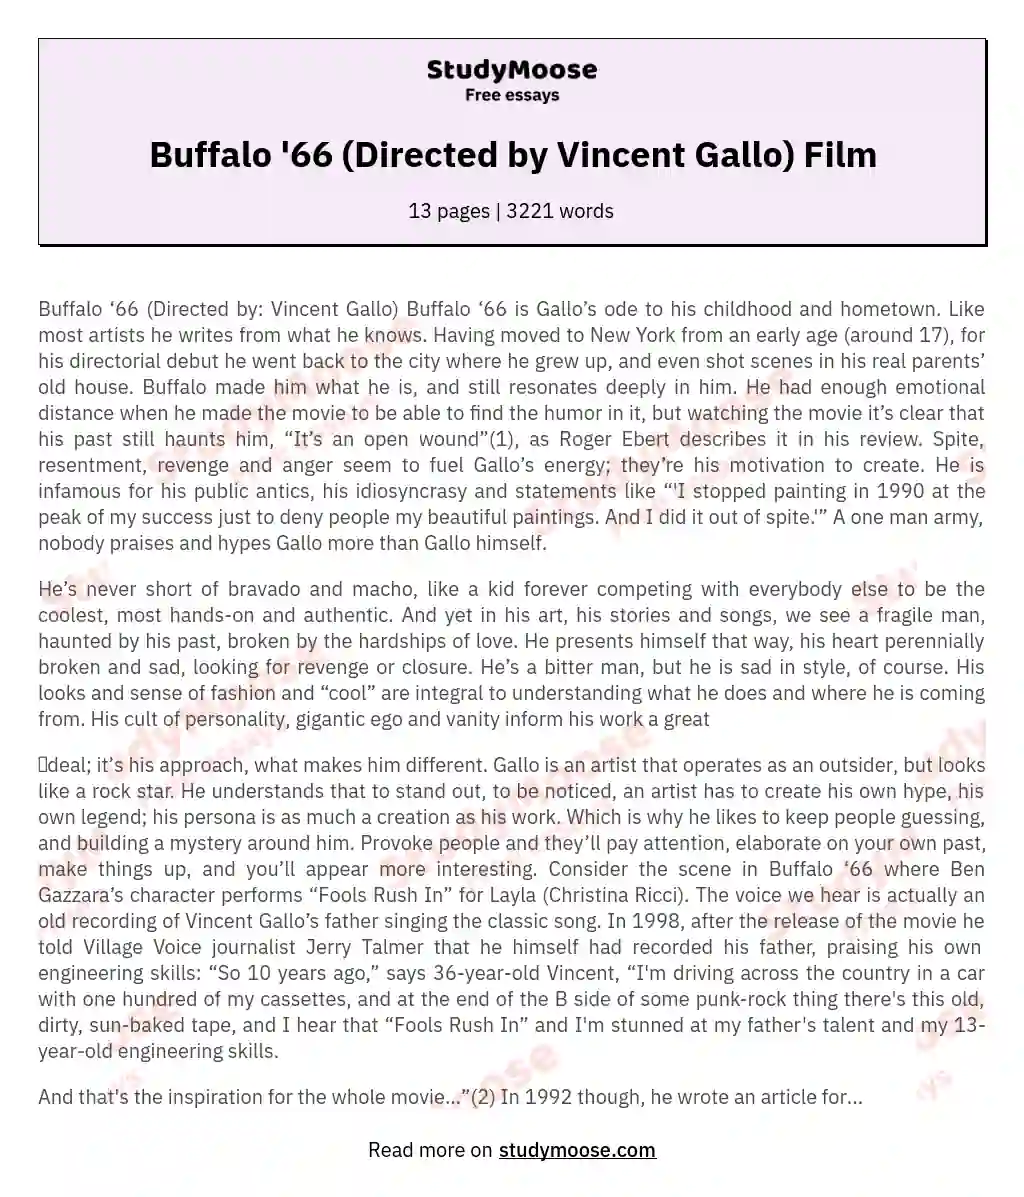 Buffalo '66 (Directed by Vincent Gallo) Film